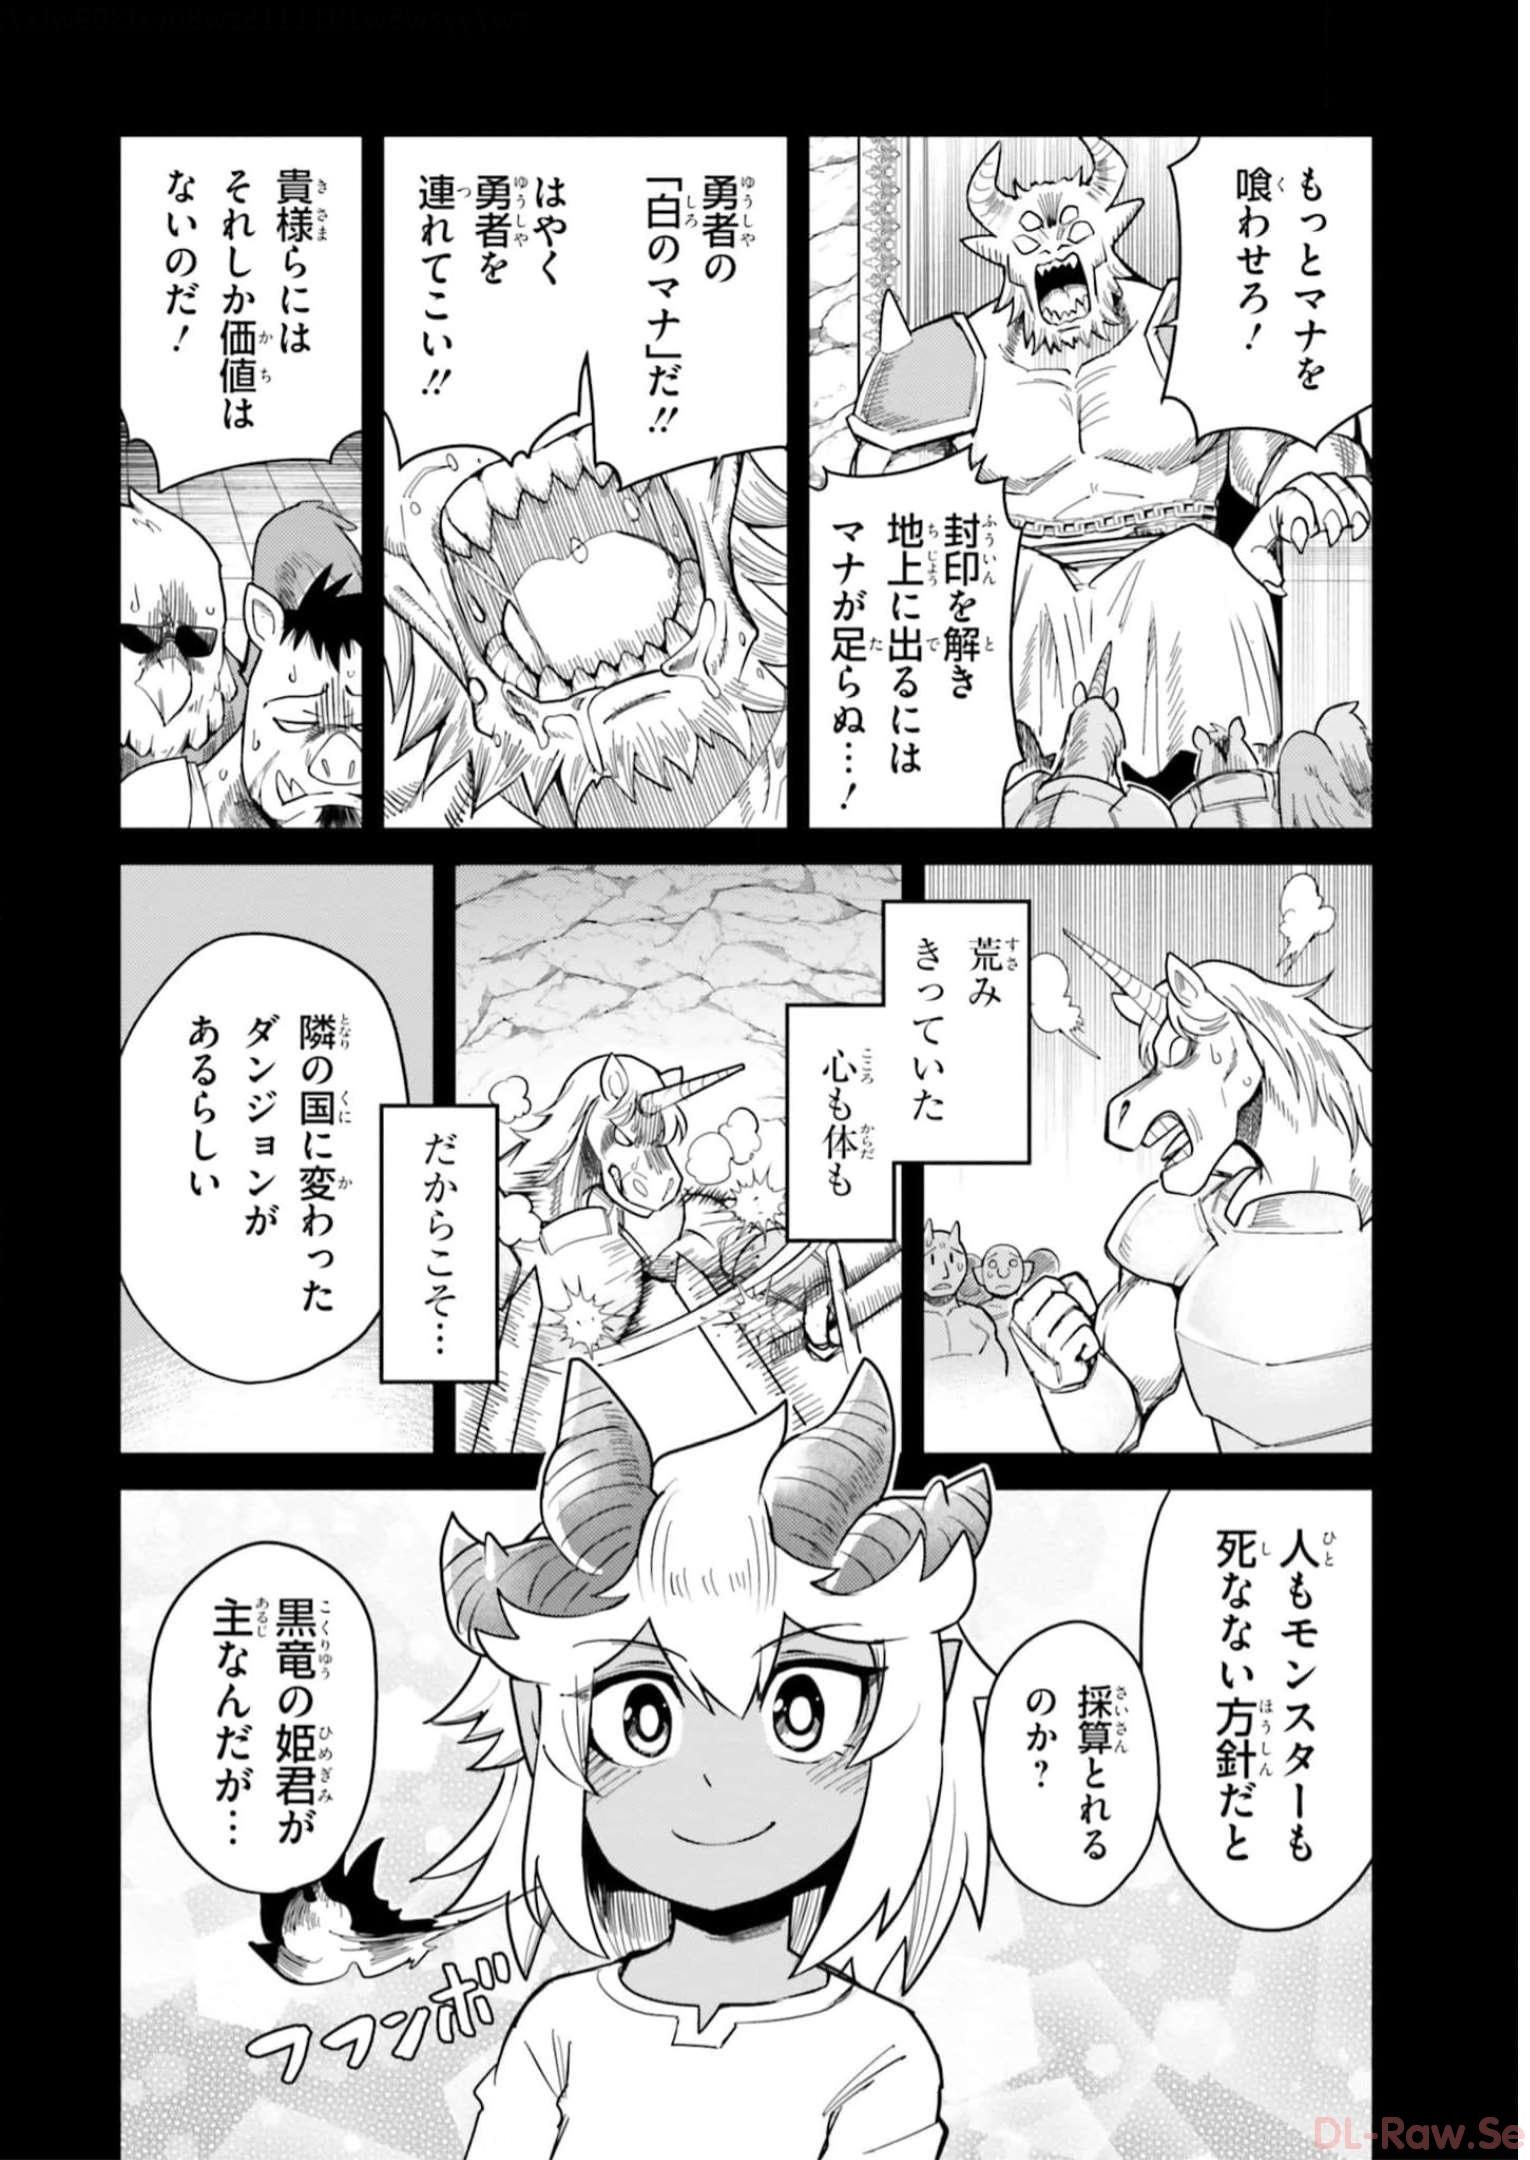 Dungeon Friends Forever Dungeon’s Childhood Friend ダンジョンの幼なじみ 第22話 - Page 7